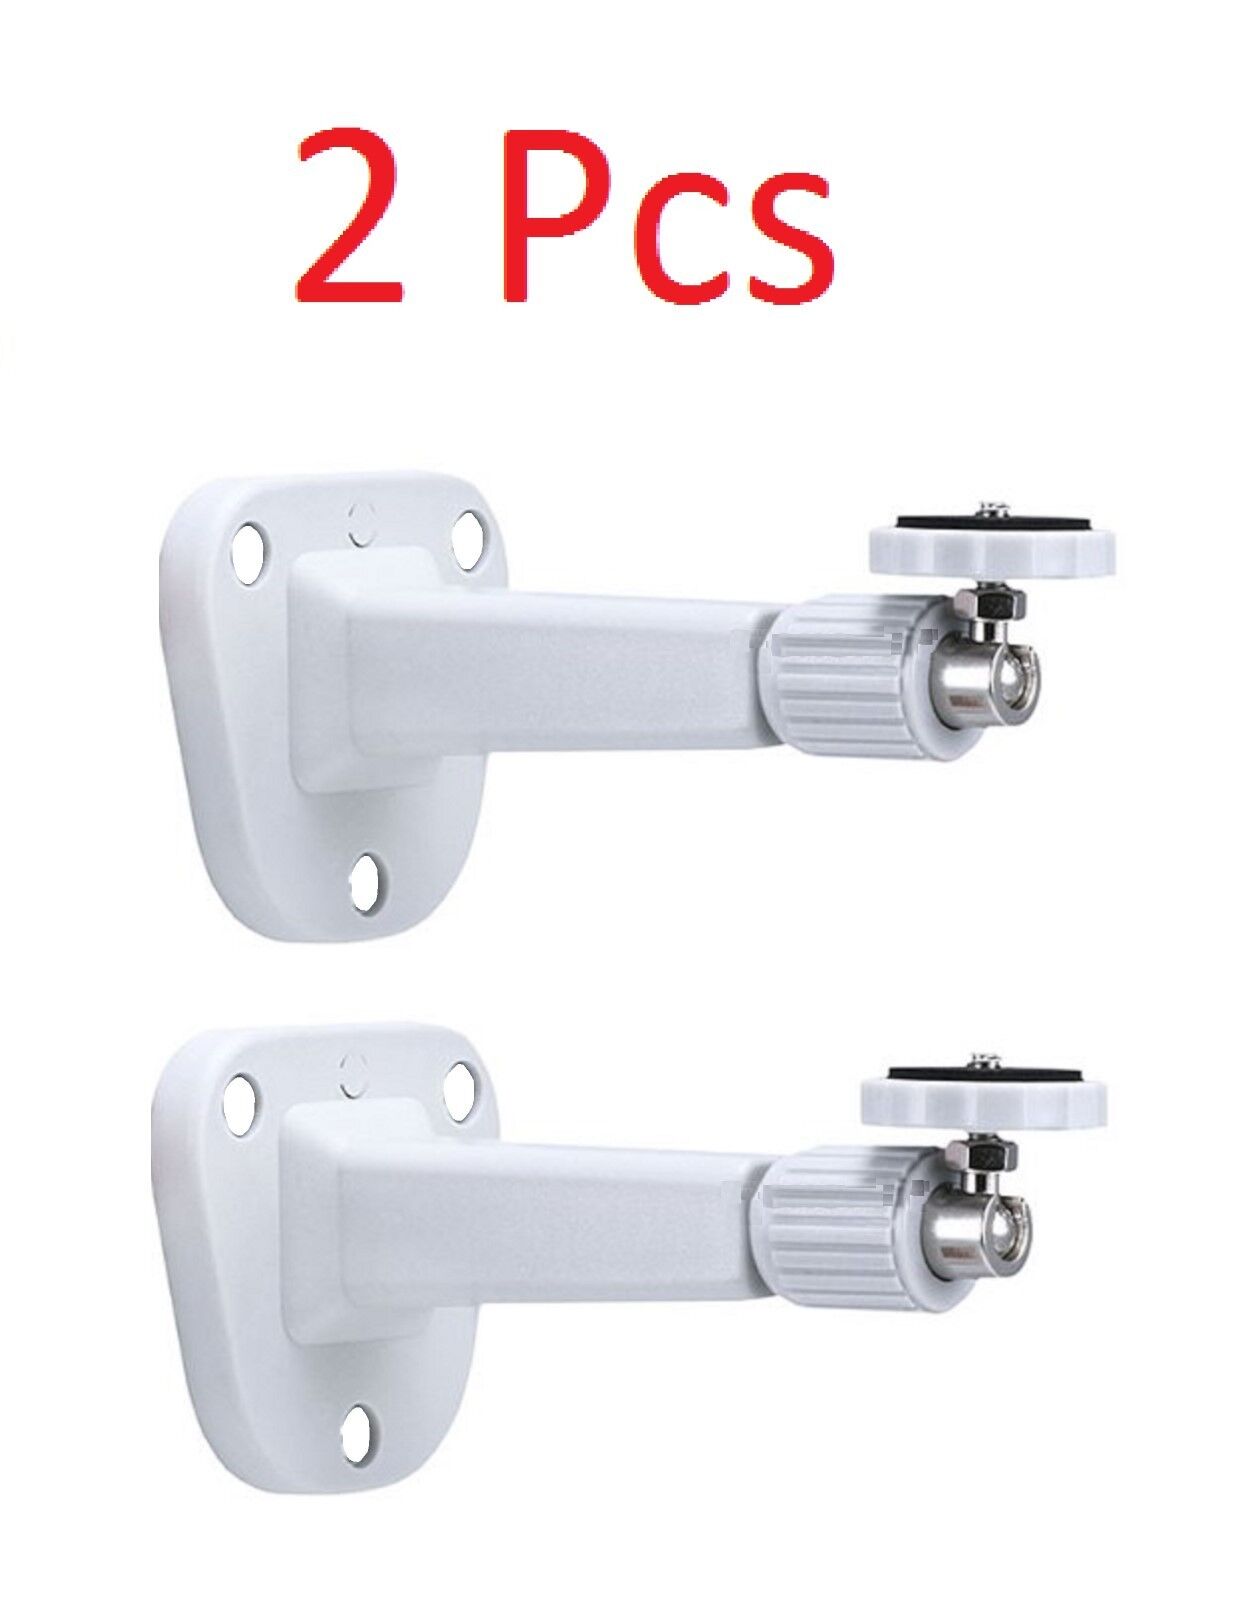 2Pcs Wall Ceiling Mount Bracket for Arlo Smart Wireless IP security Camera-White